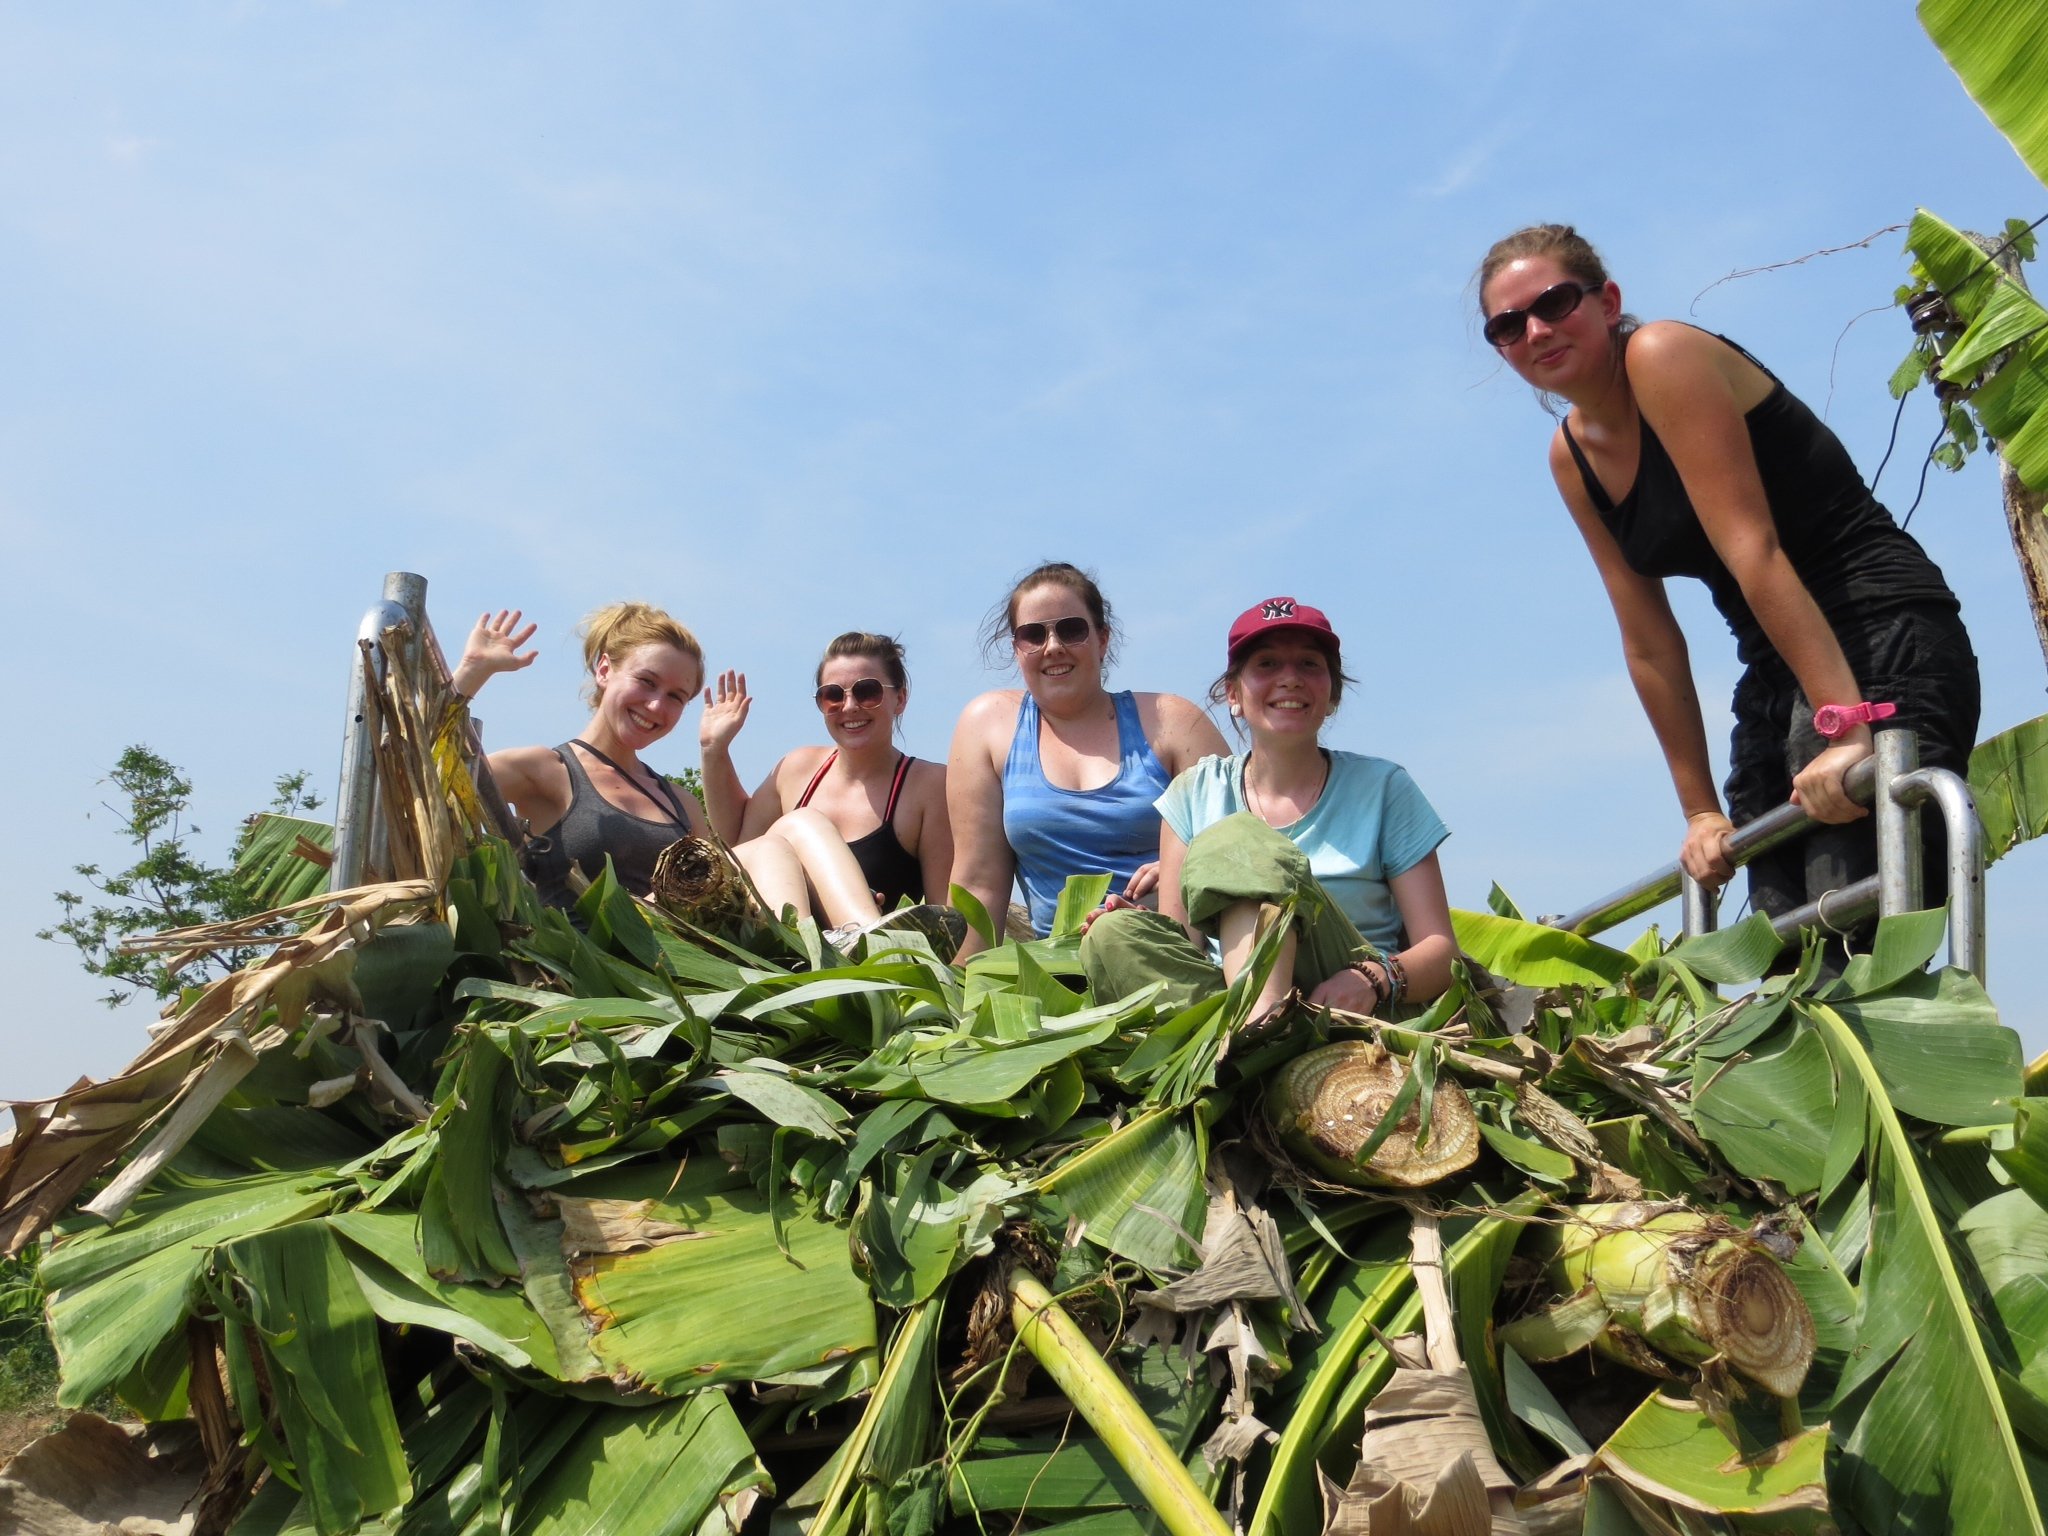 Our harvest group on top of the harvest truck filled with banana trees.jpeg